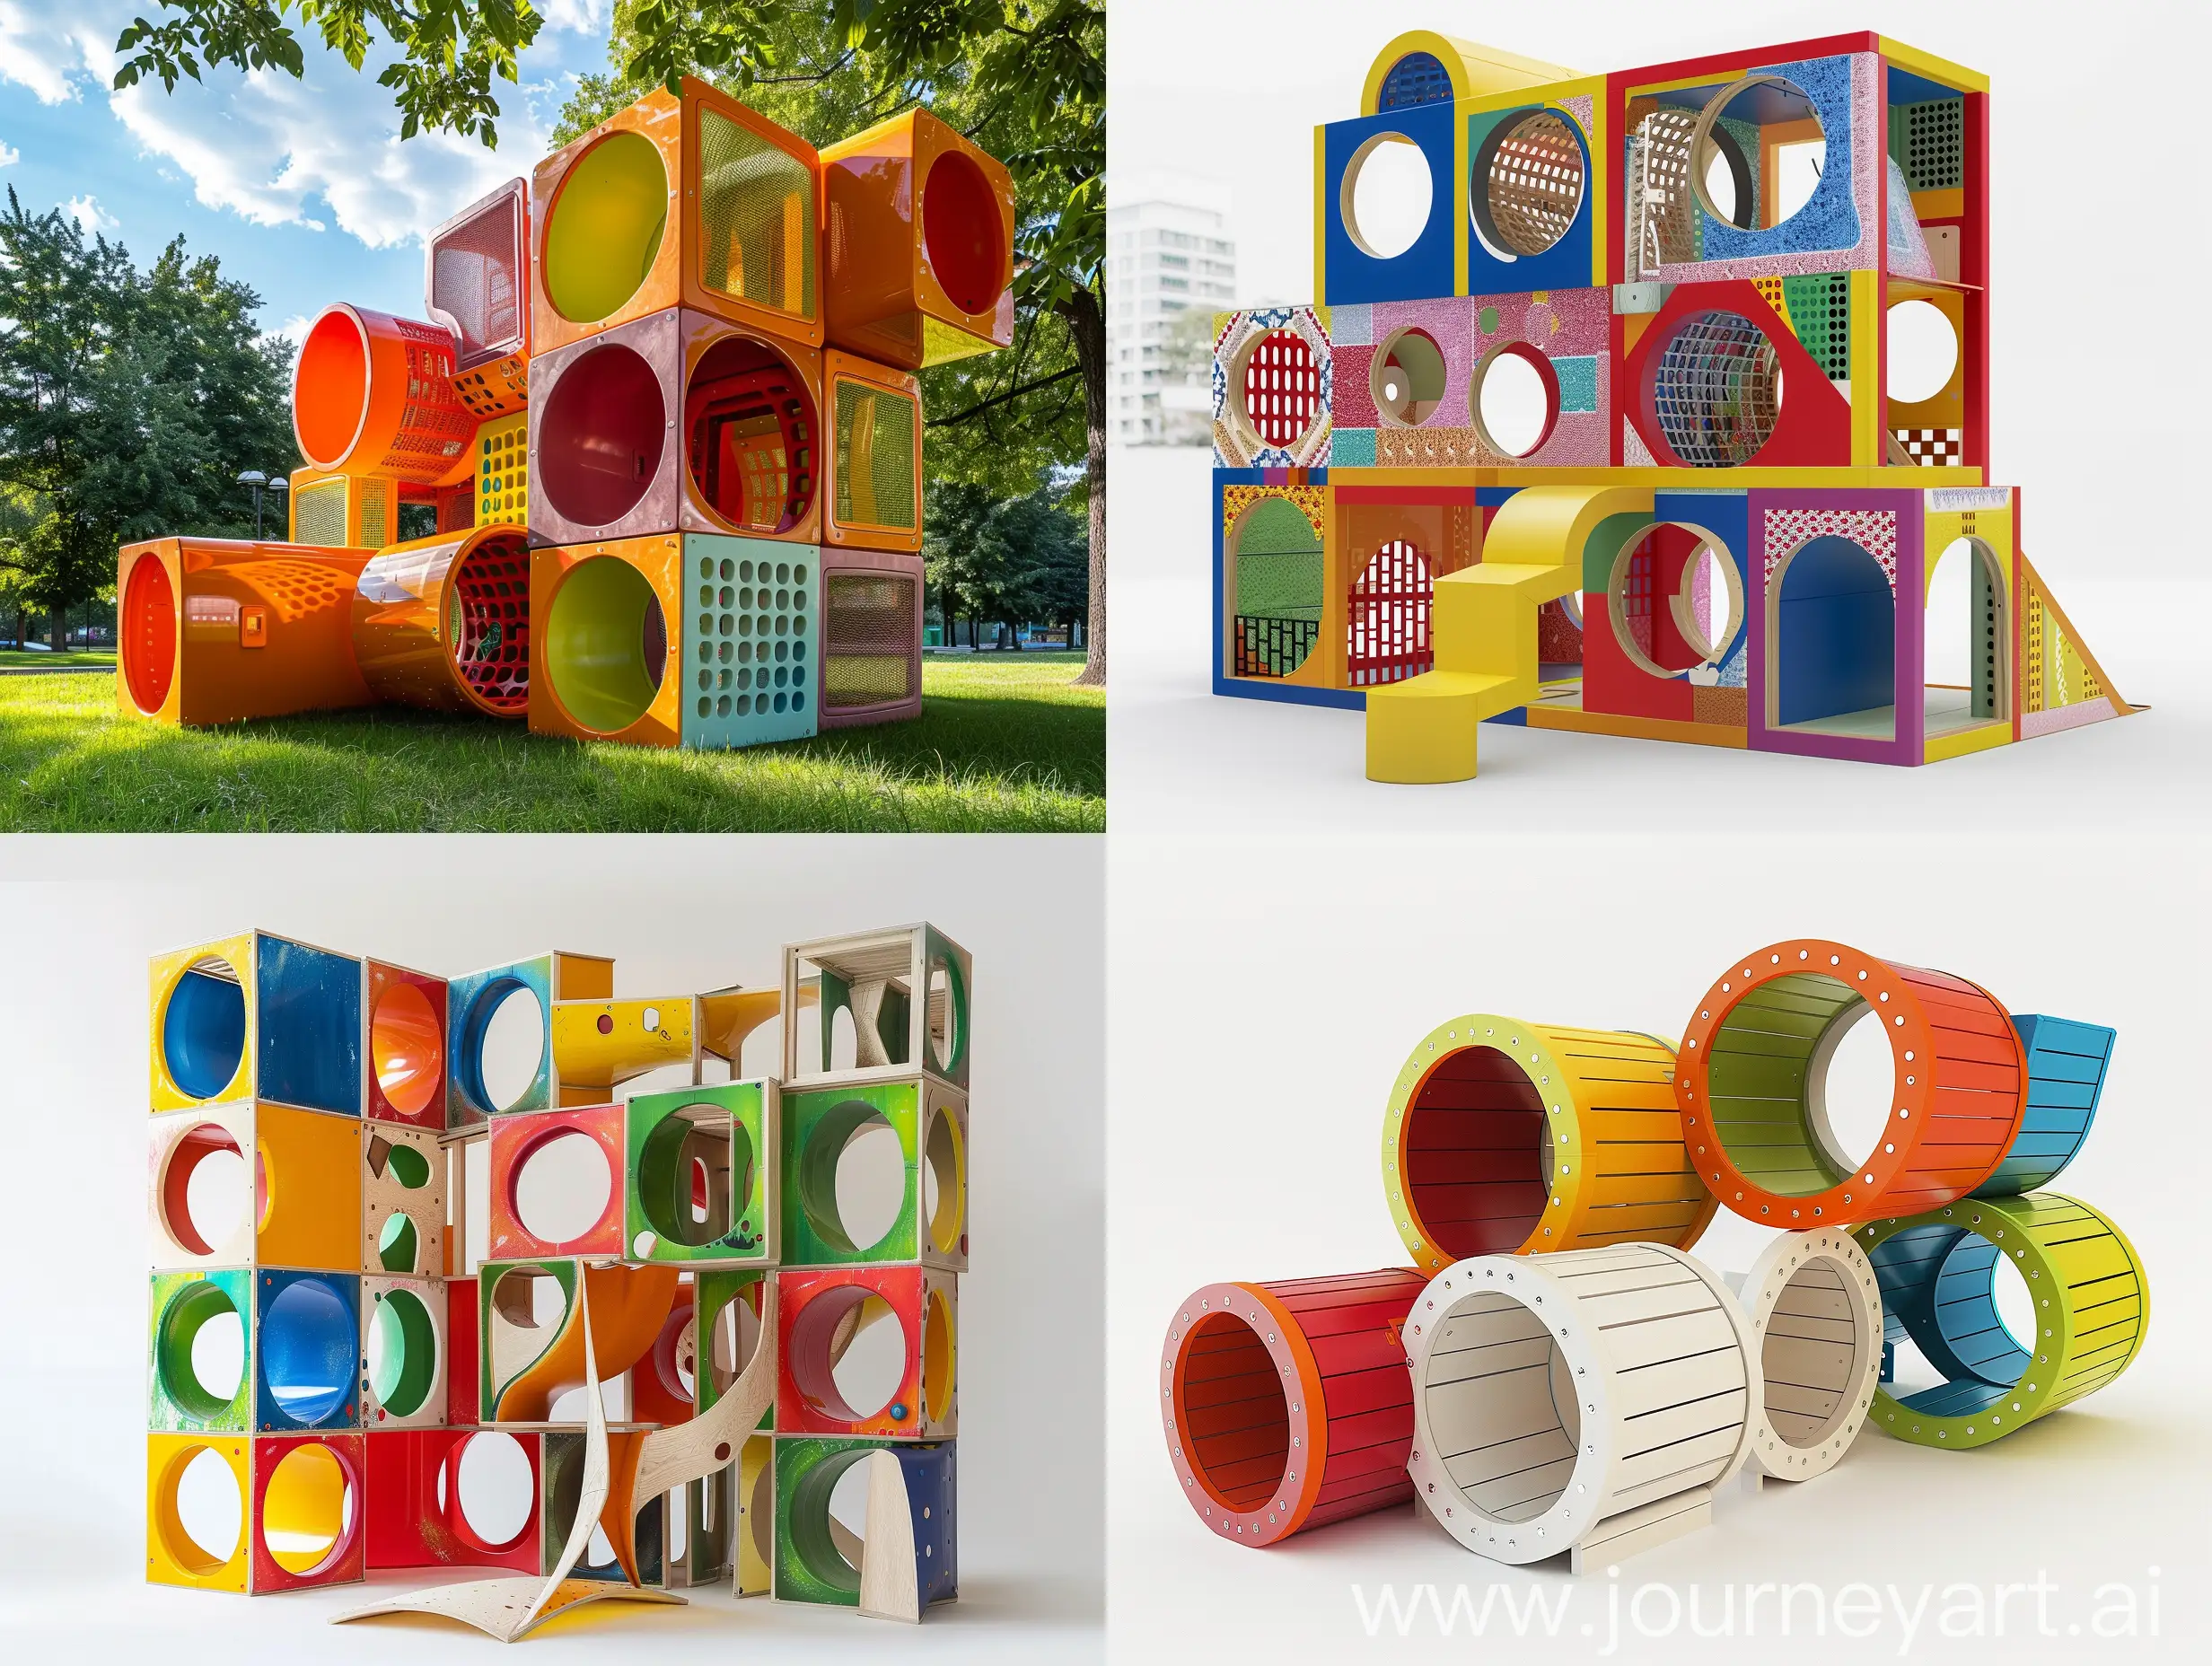 Engaging Element for New Generation Children:Design a modular, abstract play structure for children inspired by "Toy Story" and "Paw Patrol," using Bauhaus design principles. The structure should feature bright, primary colors, and be constructed from recycled plastics and treated wood. Each module is approximately 1m x 1m x 1m, with rounded edges for safety and textural variety for sensory engagement. The play elements should include climbing and sliding areas, arranged in a flexible, stackable configuration. This play structure is intended for high-traffic urban spaces such as mall fronts and small parks, providing a safe and engaging play environment without digital elements.             Form & Shape: Abstract forms inspired by animation characters and scenes, modular cubes and curves.
Structure: Modular, stackable units that can be rearranged.
Dimensions: Each module approximately 1m x 1m x 1m, allowing flexibility in space utilization.
Materials: Recycled plastics, treated wood, weather-resistant paint.
Colors: Bright, primary colors inspired by animation palettes, with a matte finish to reduce glare.
Details: Rounded edges for safety, textural variety for sensory engagement.
Features: Climbing, sliding, and imaginative play areas.
Location: High-traffic urban spaces like mall fronts, small parks, or community centers.
Design Style: Bauhaus-inspired minimalism with playful, abstract references to animations.